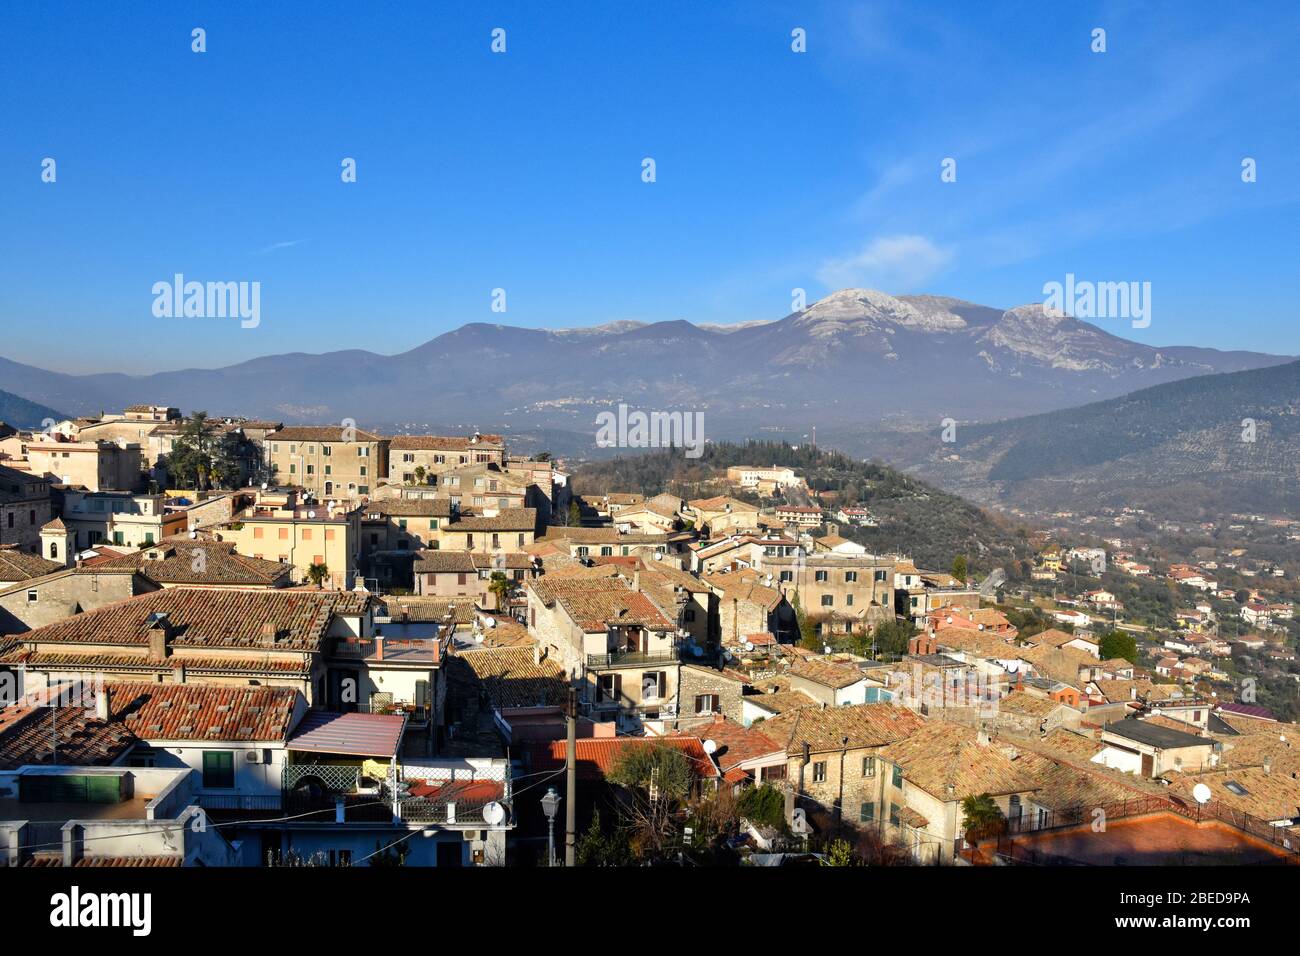 Panoramic view of Alatri in Italy Stock Photo